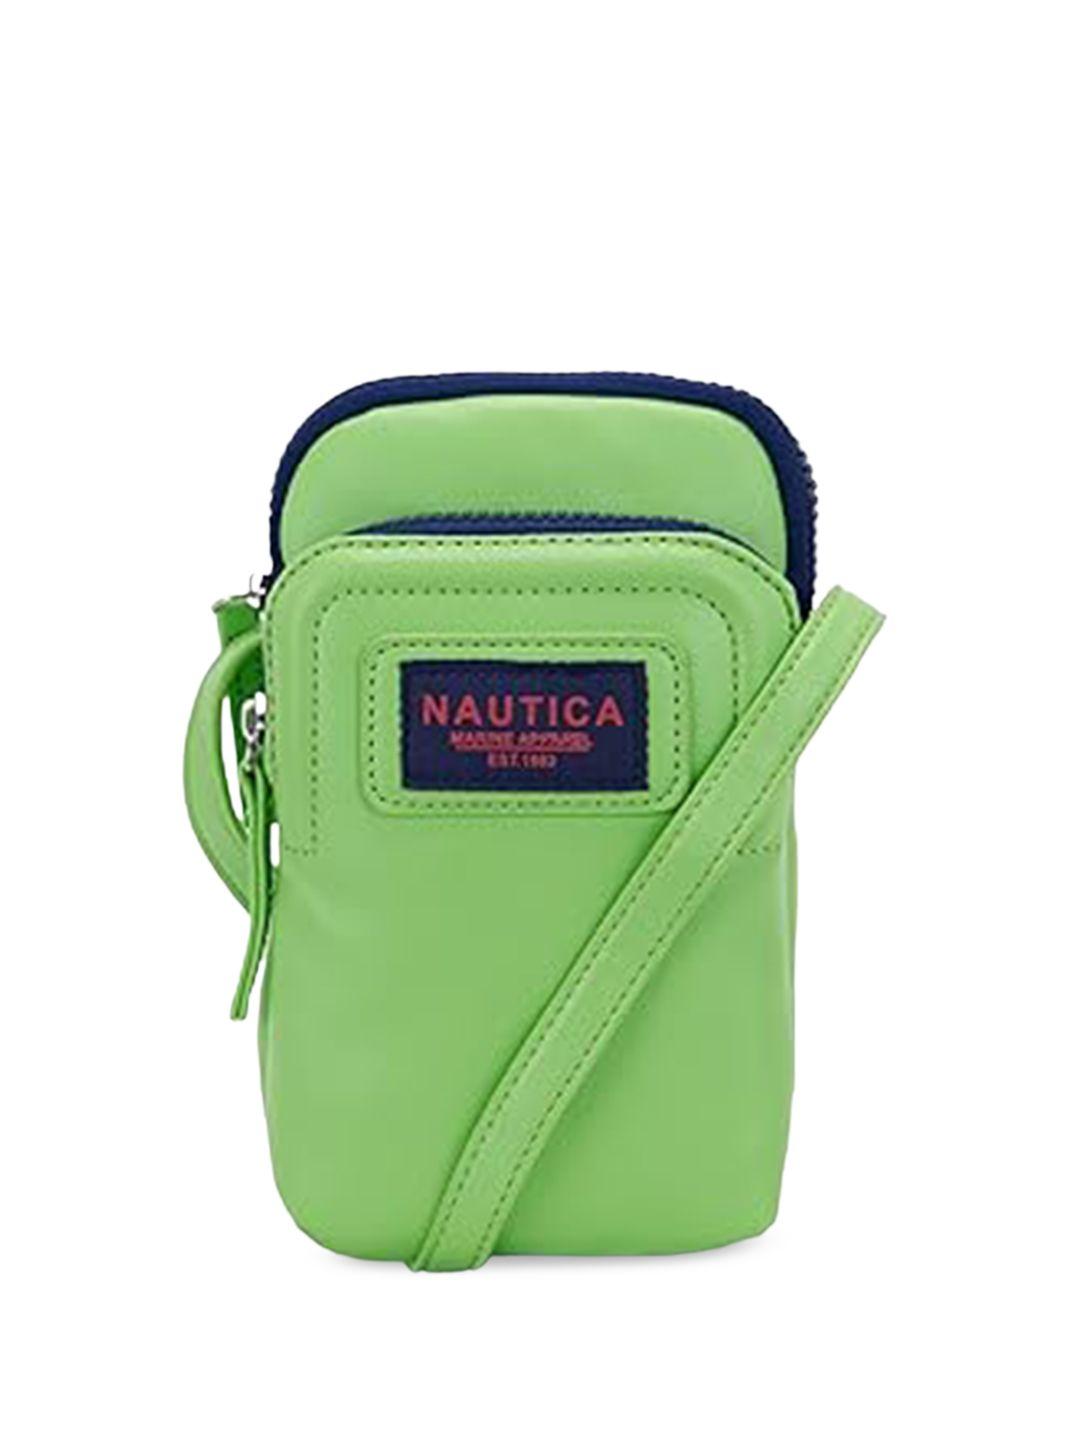 nautica pu structured sling bag with applique